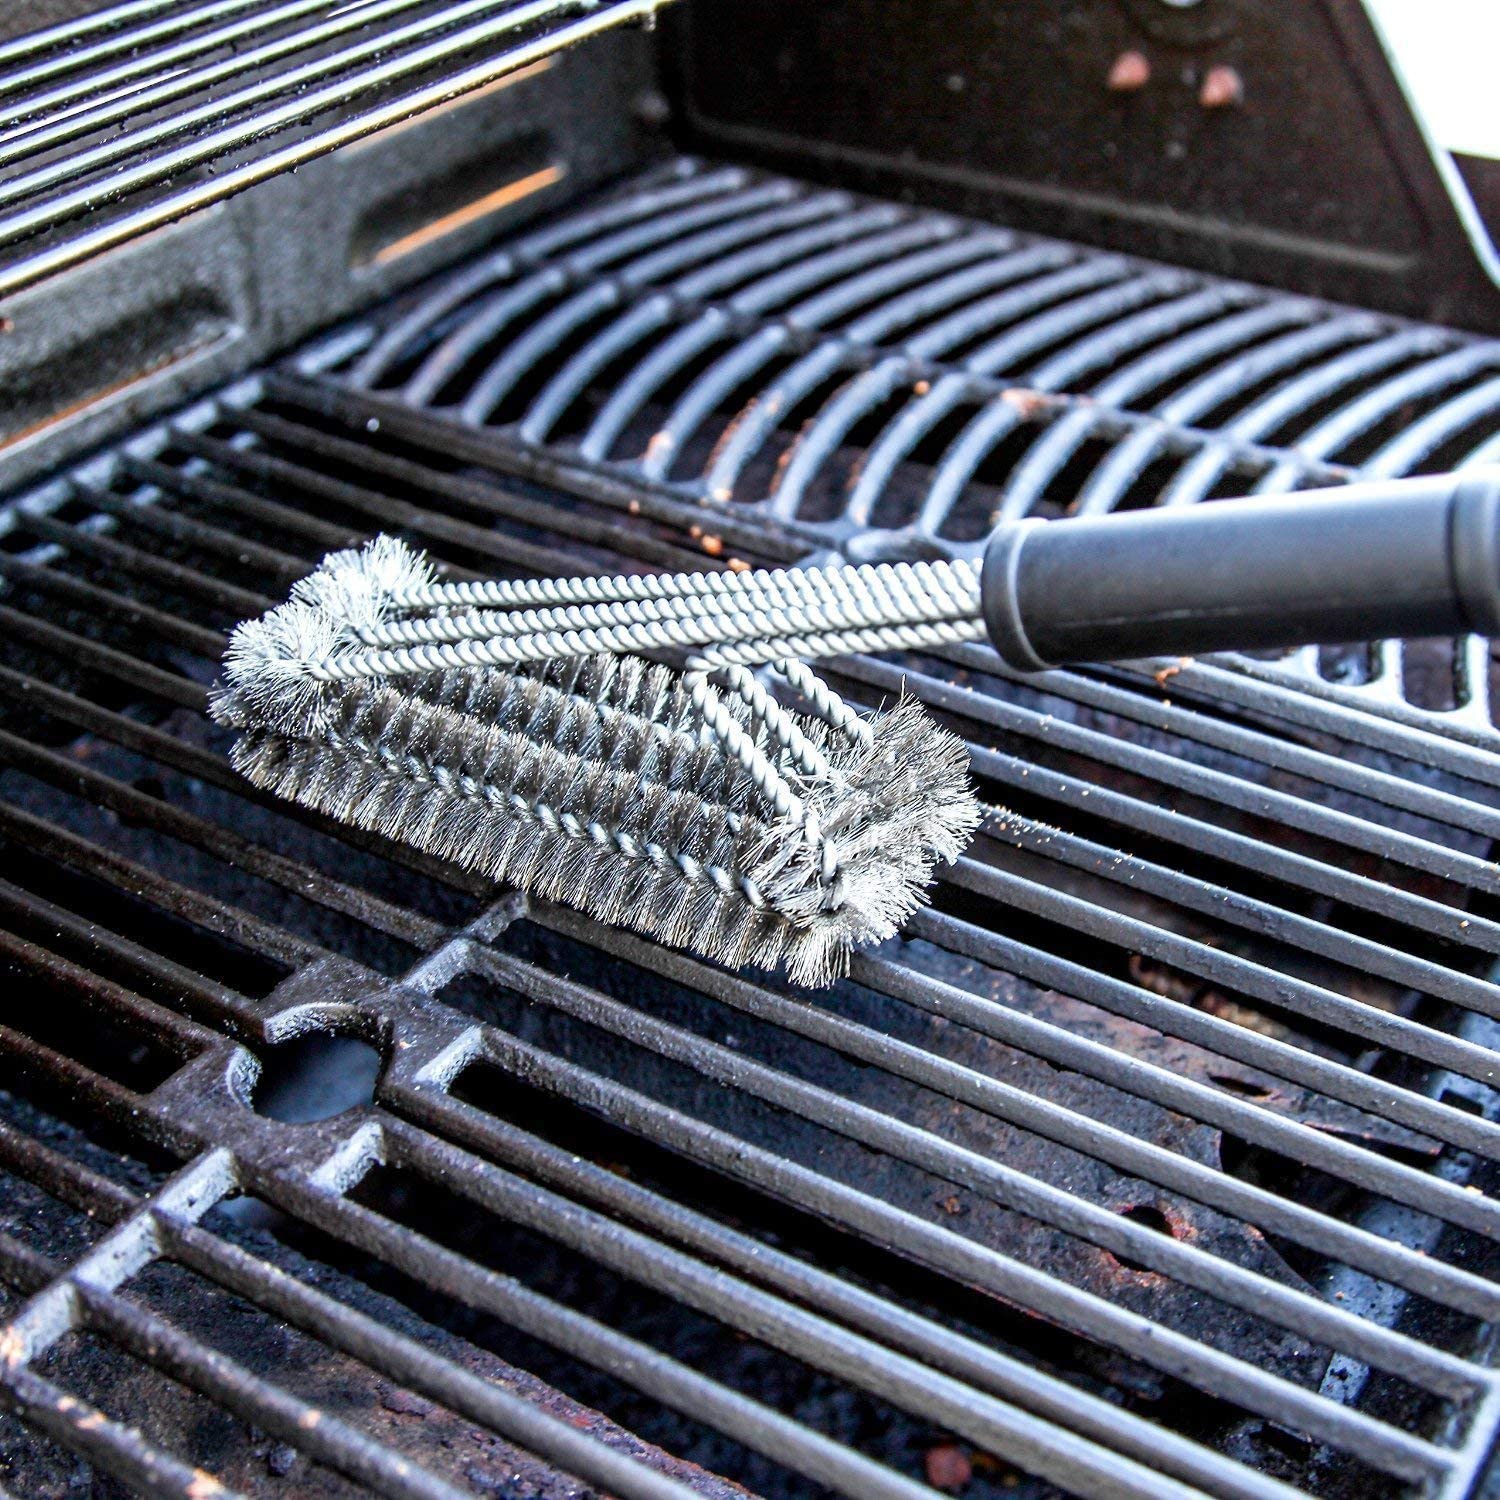 Cleaning up the grill grates